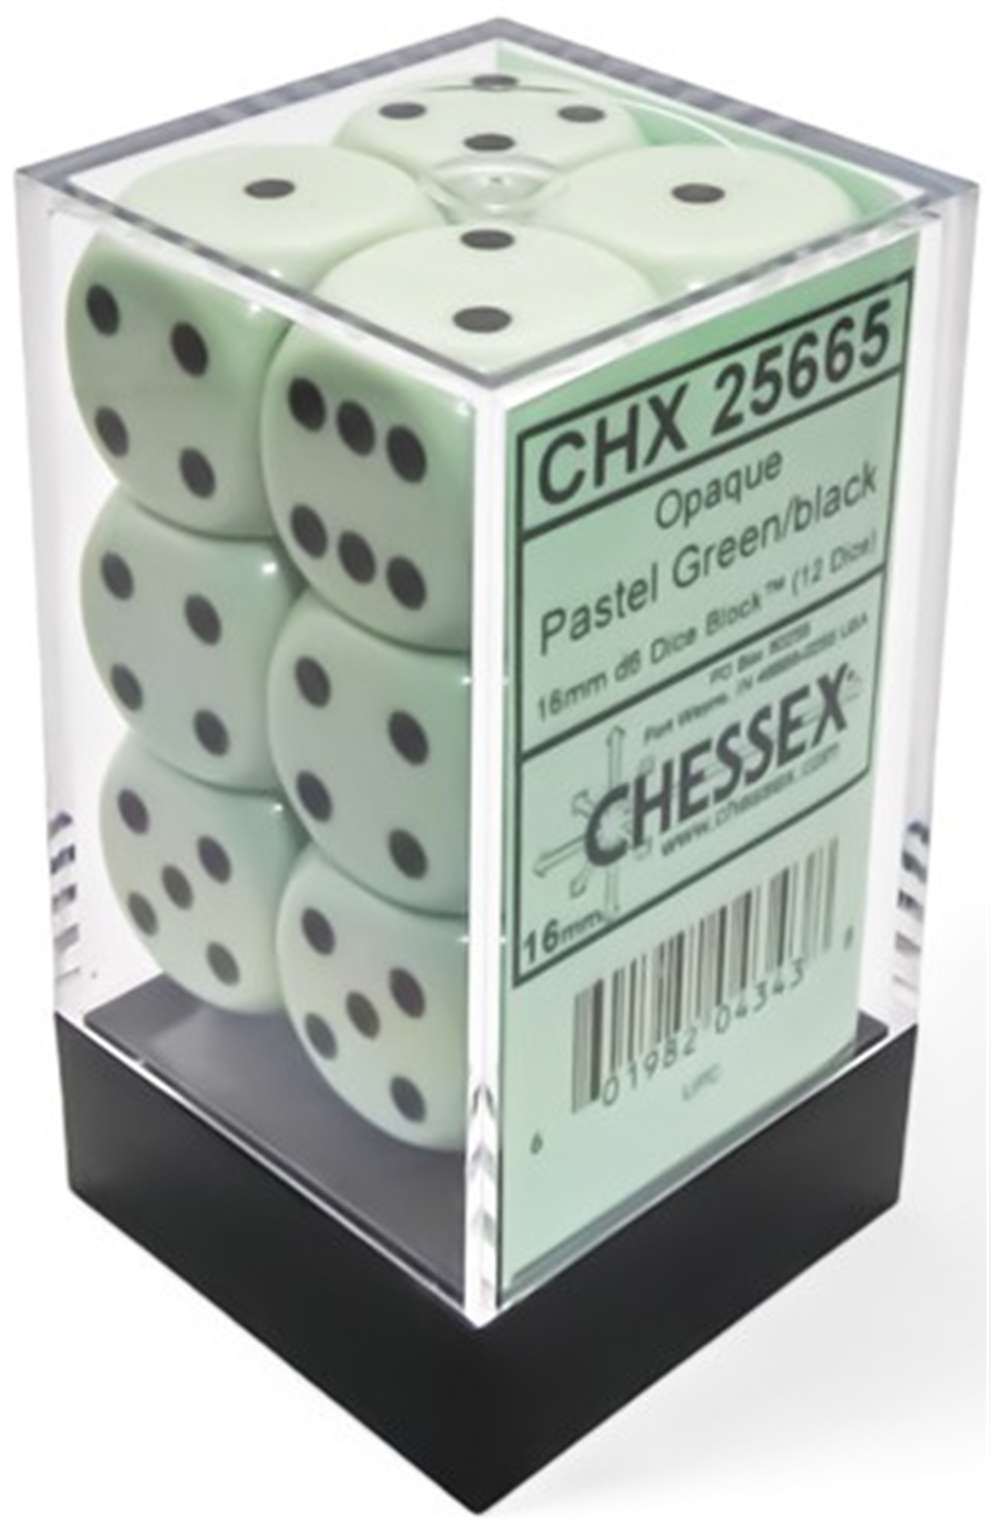 Chessex Dice Opaque Pastel Green D6 16Mm (12)